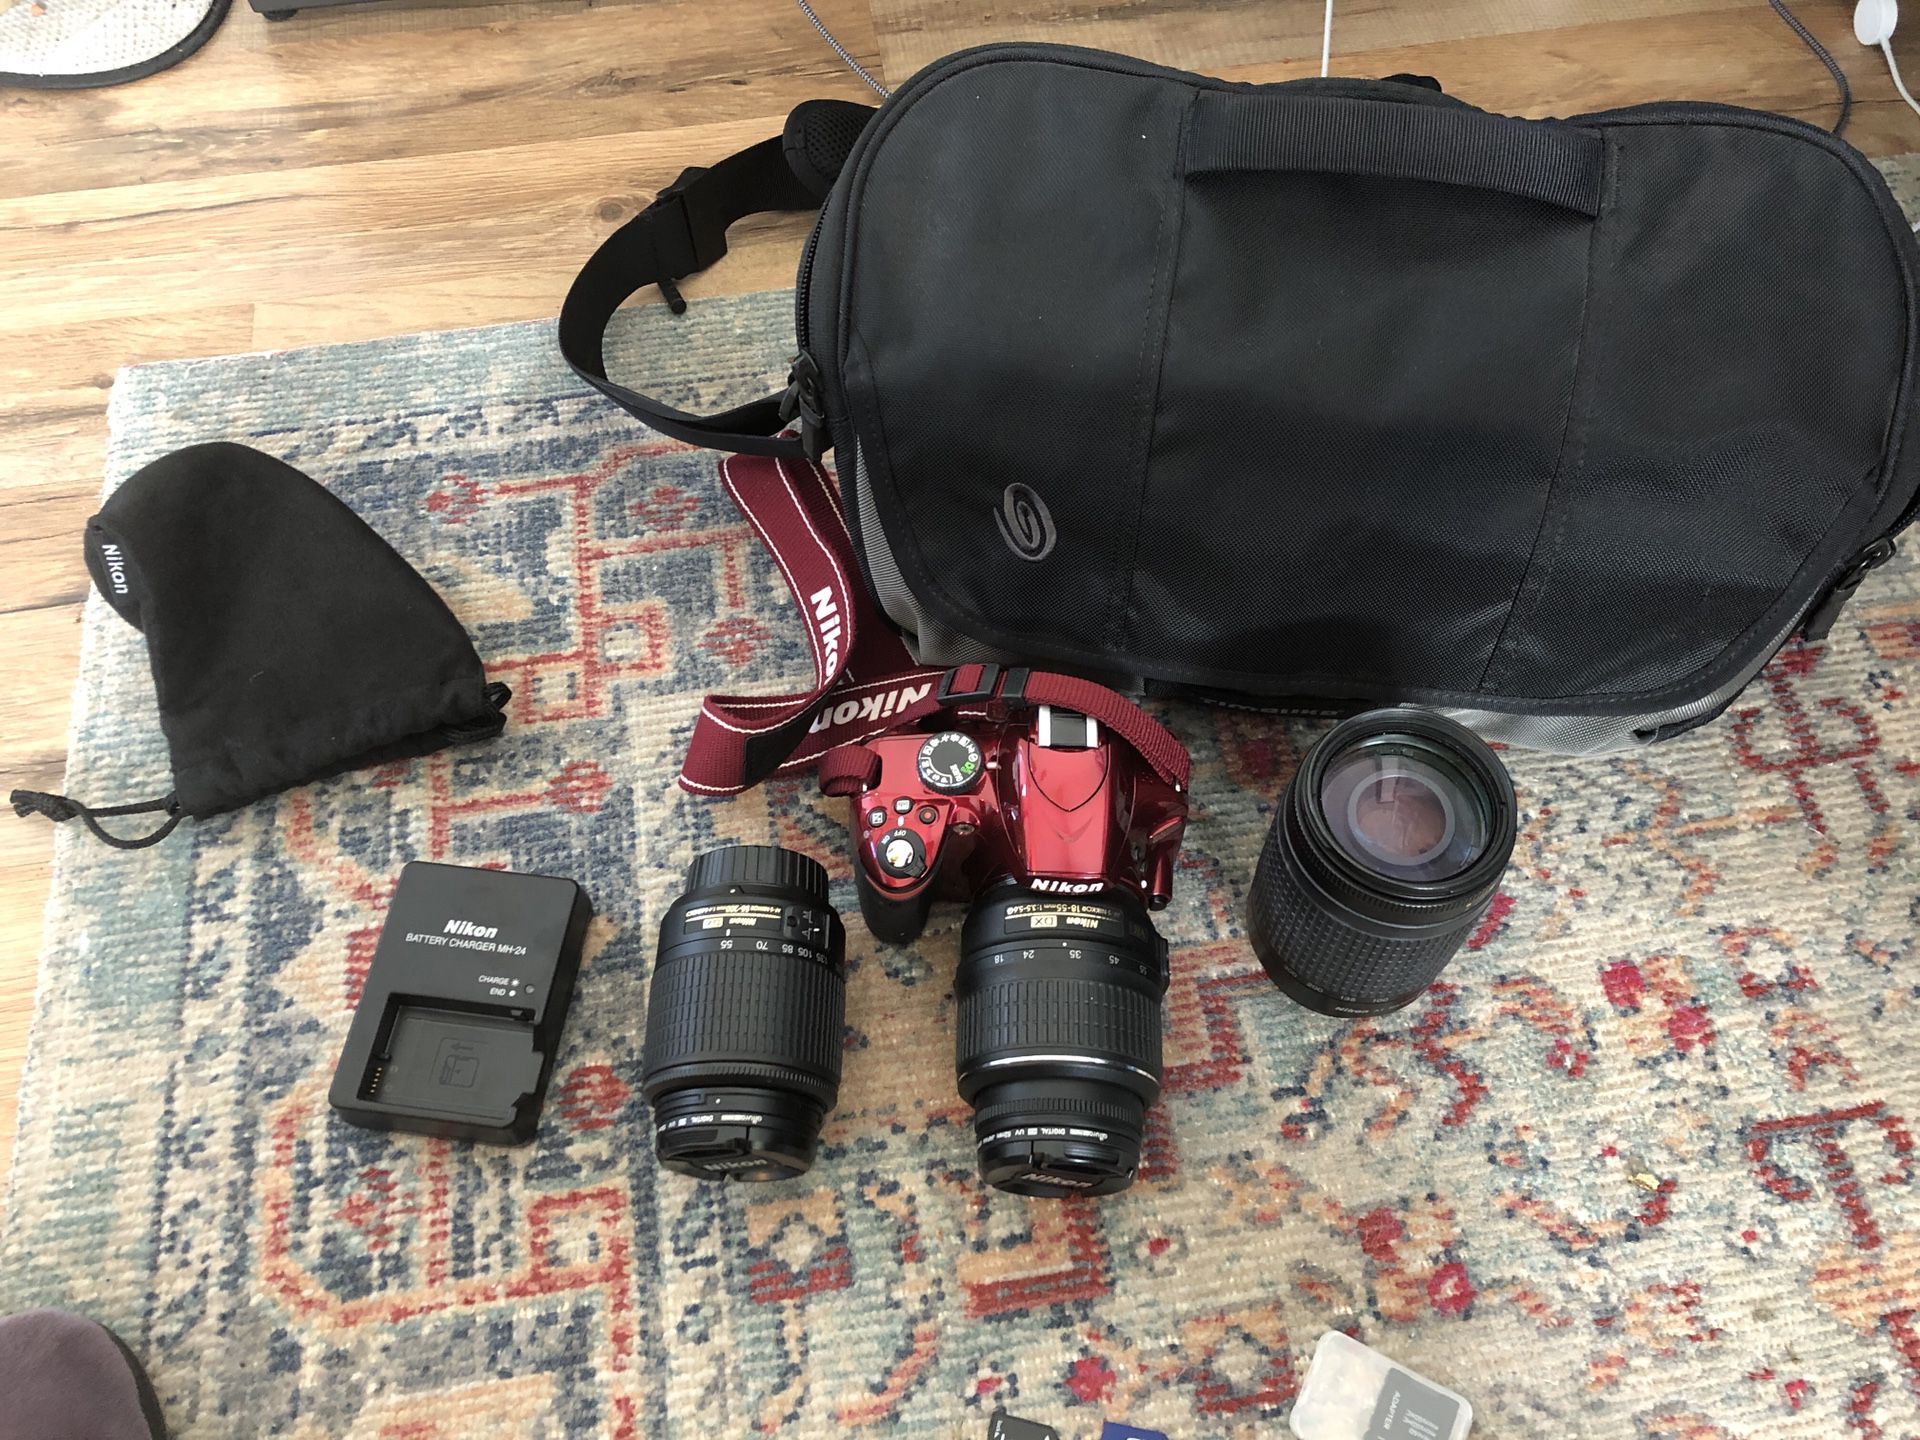 Nikon D3200 with bag and 3 lenses